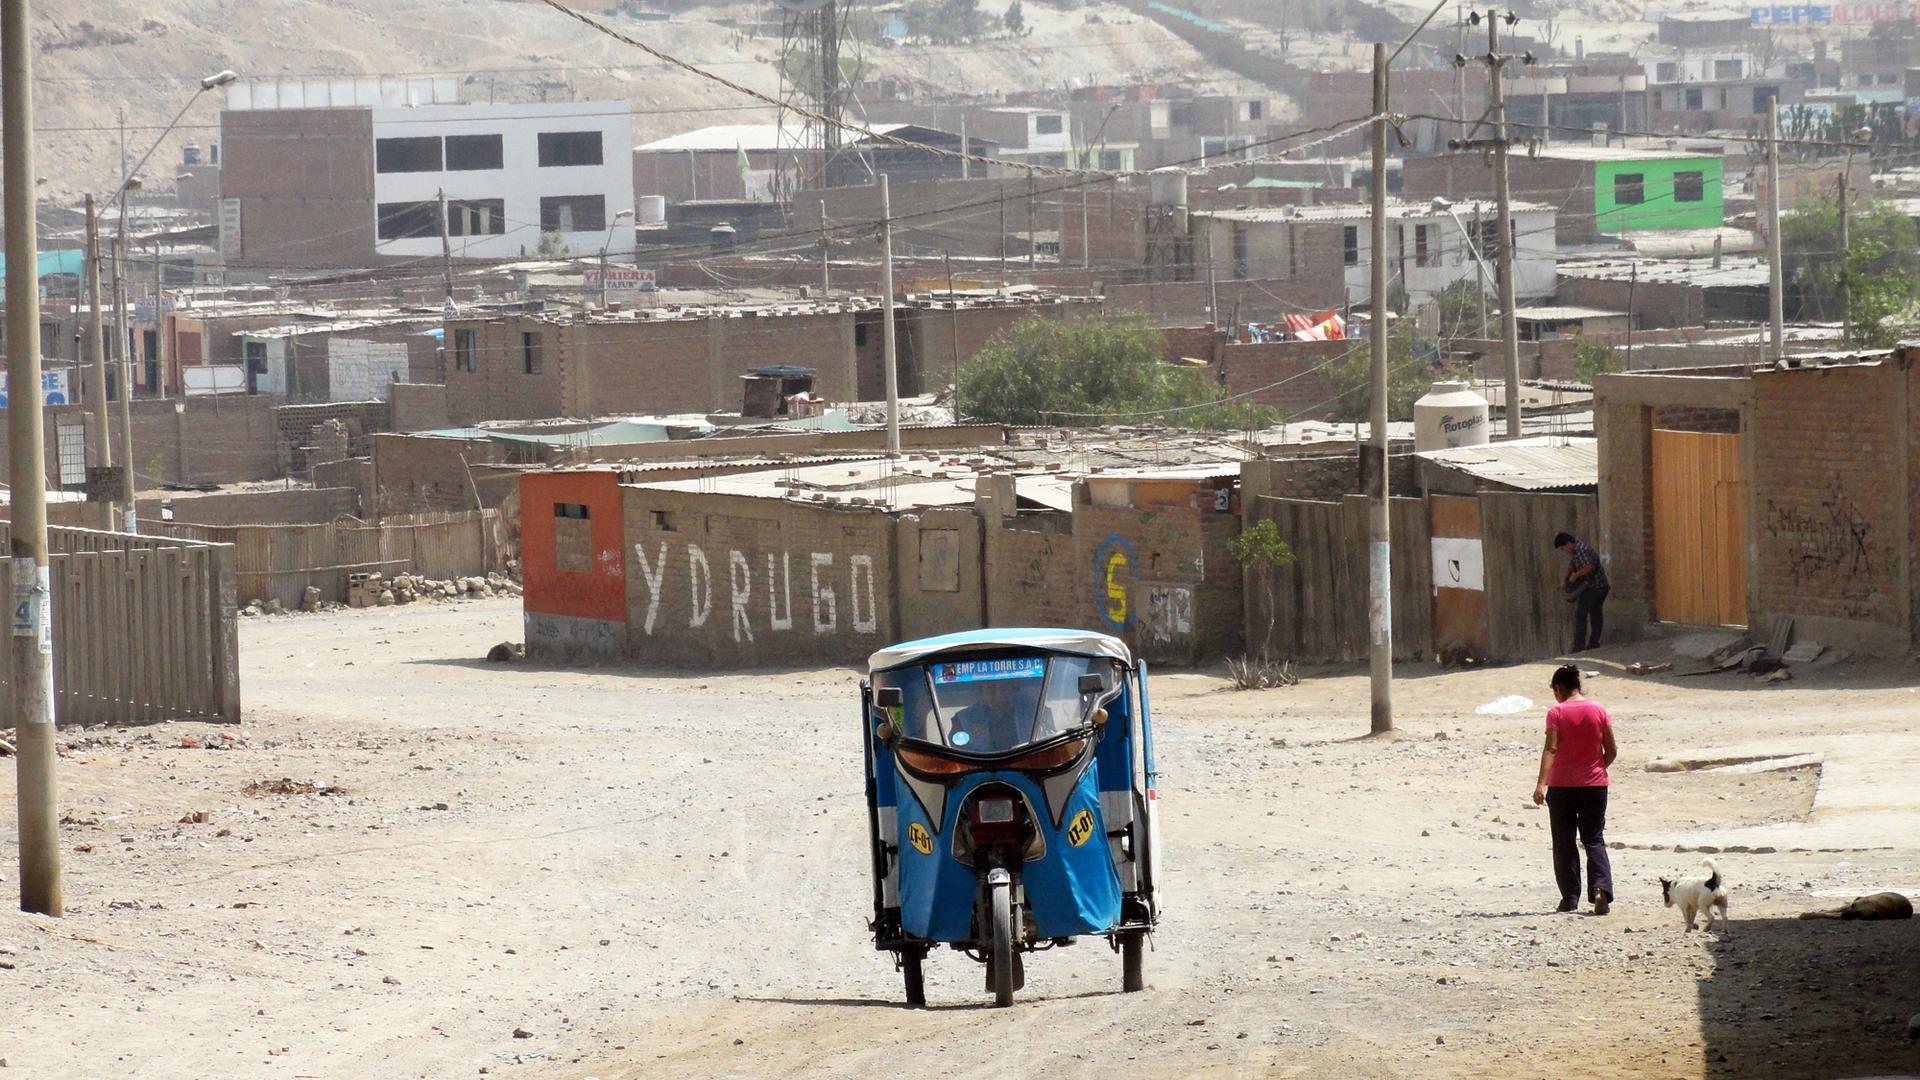 A taxi in a suburb of Lima